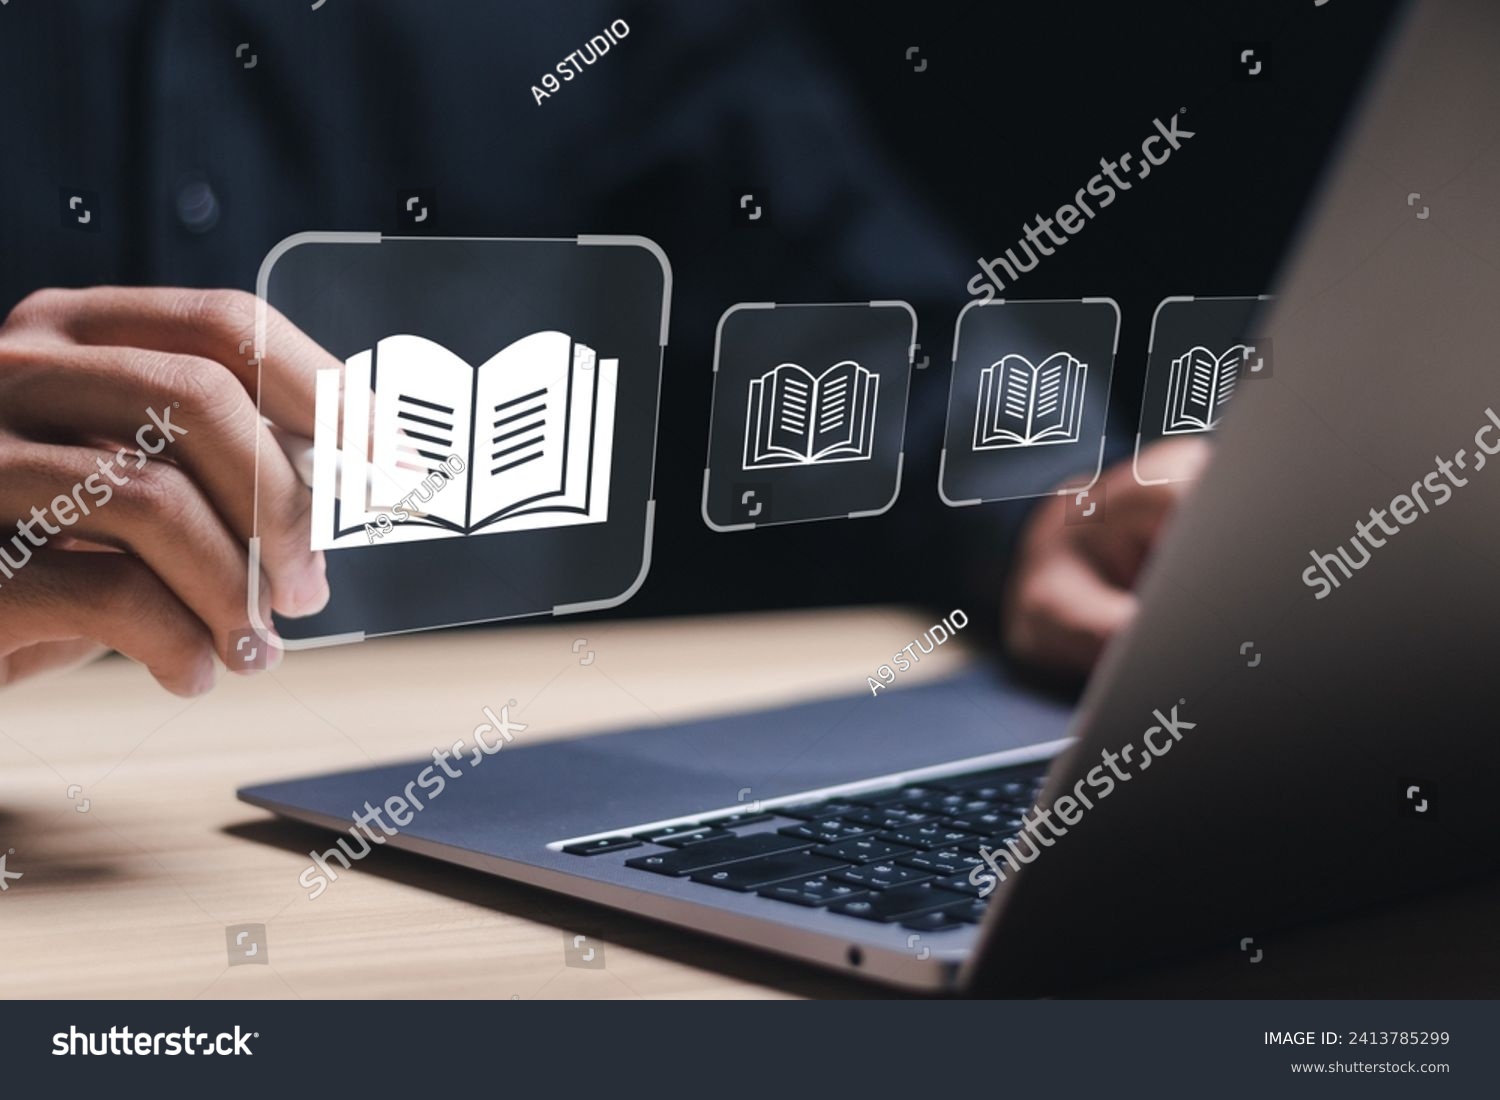 E-library concept. Person use laptop with virtual E-book icons for electronic books online, knowledge base on internet, digital library or e-library. #2413785299